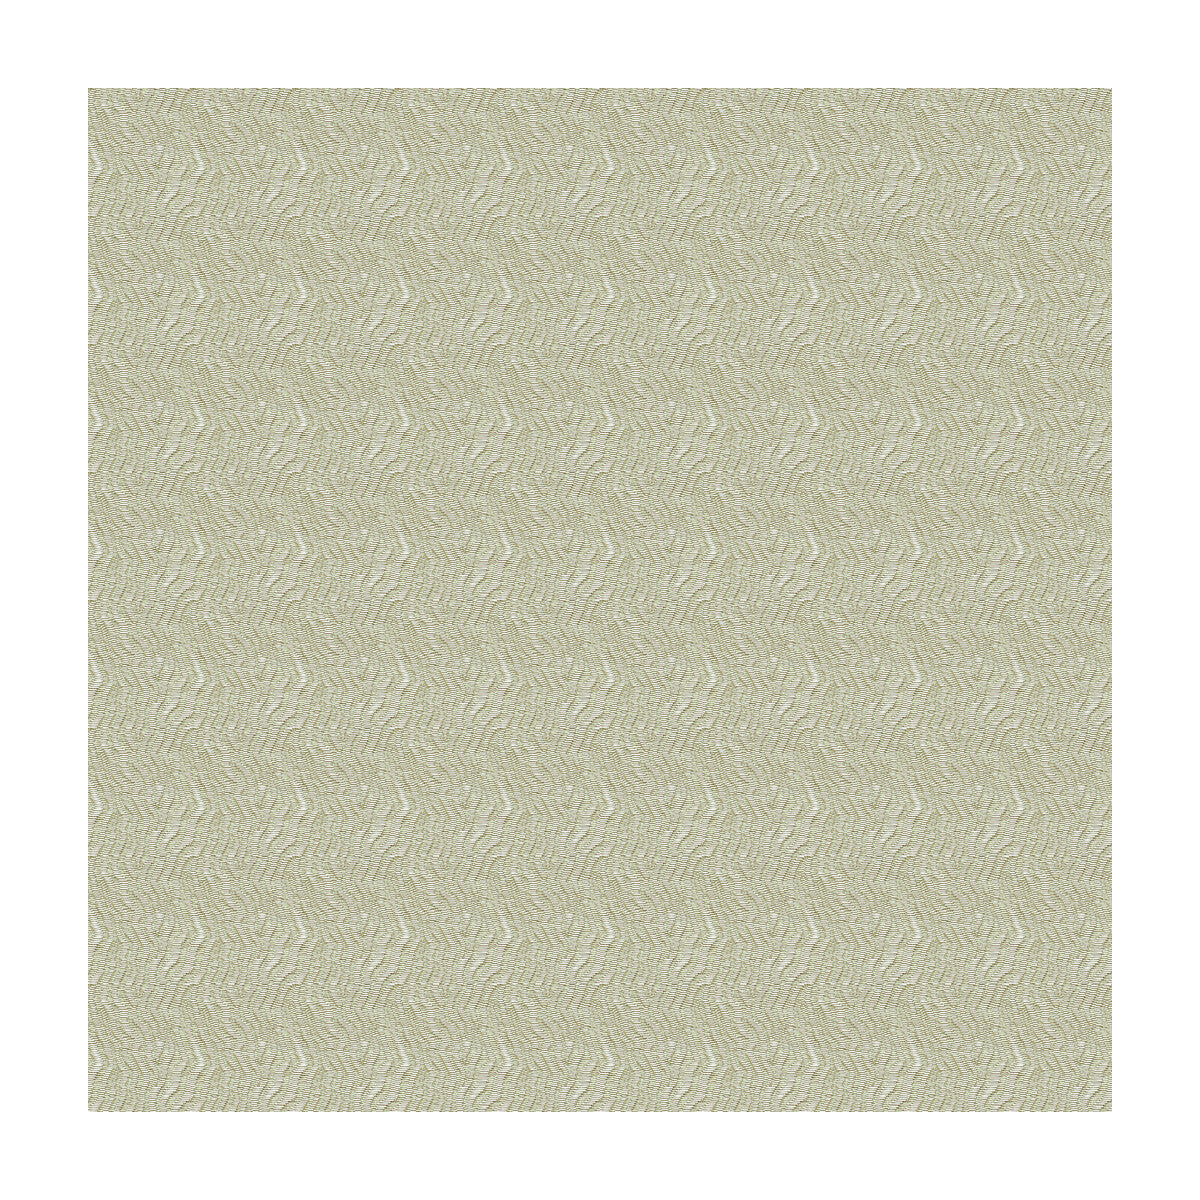 Kf Smt Jentry fabric in diamond color - pattern 27968.1611.0 - by Kravet Smart in the Candice Olson collection